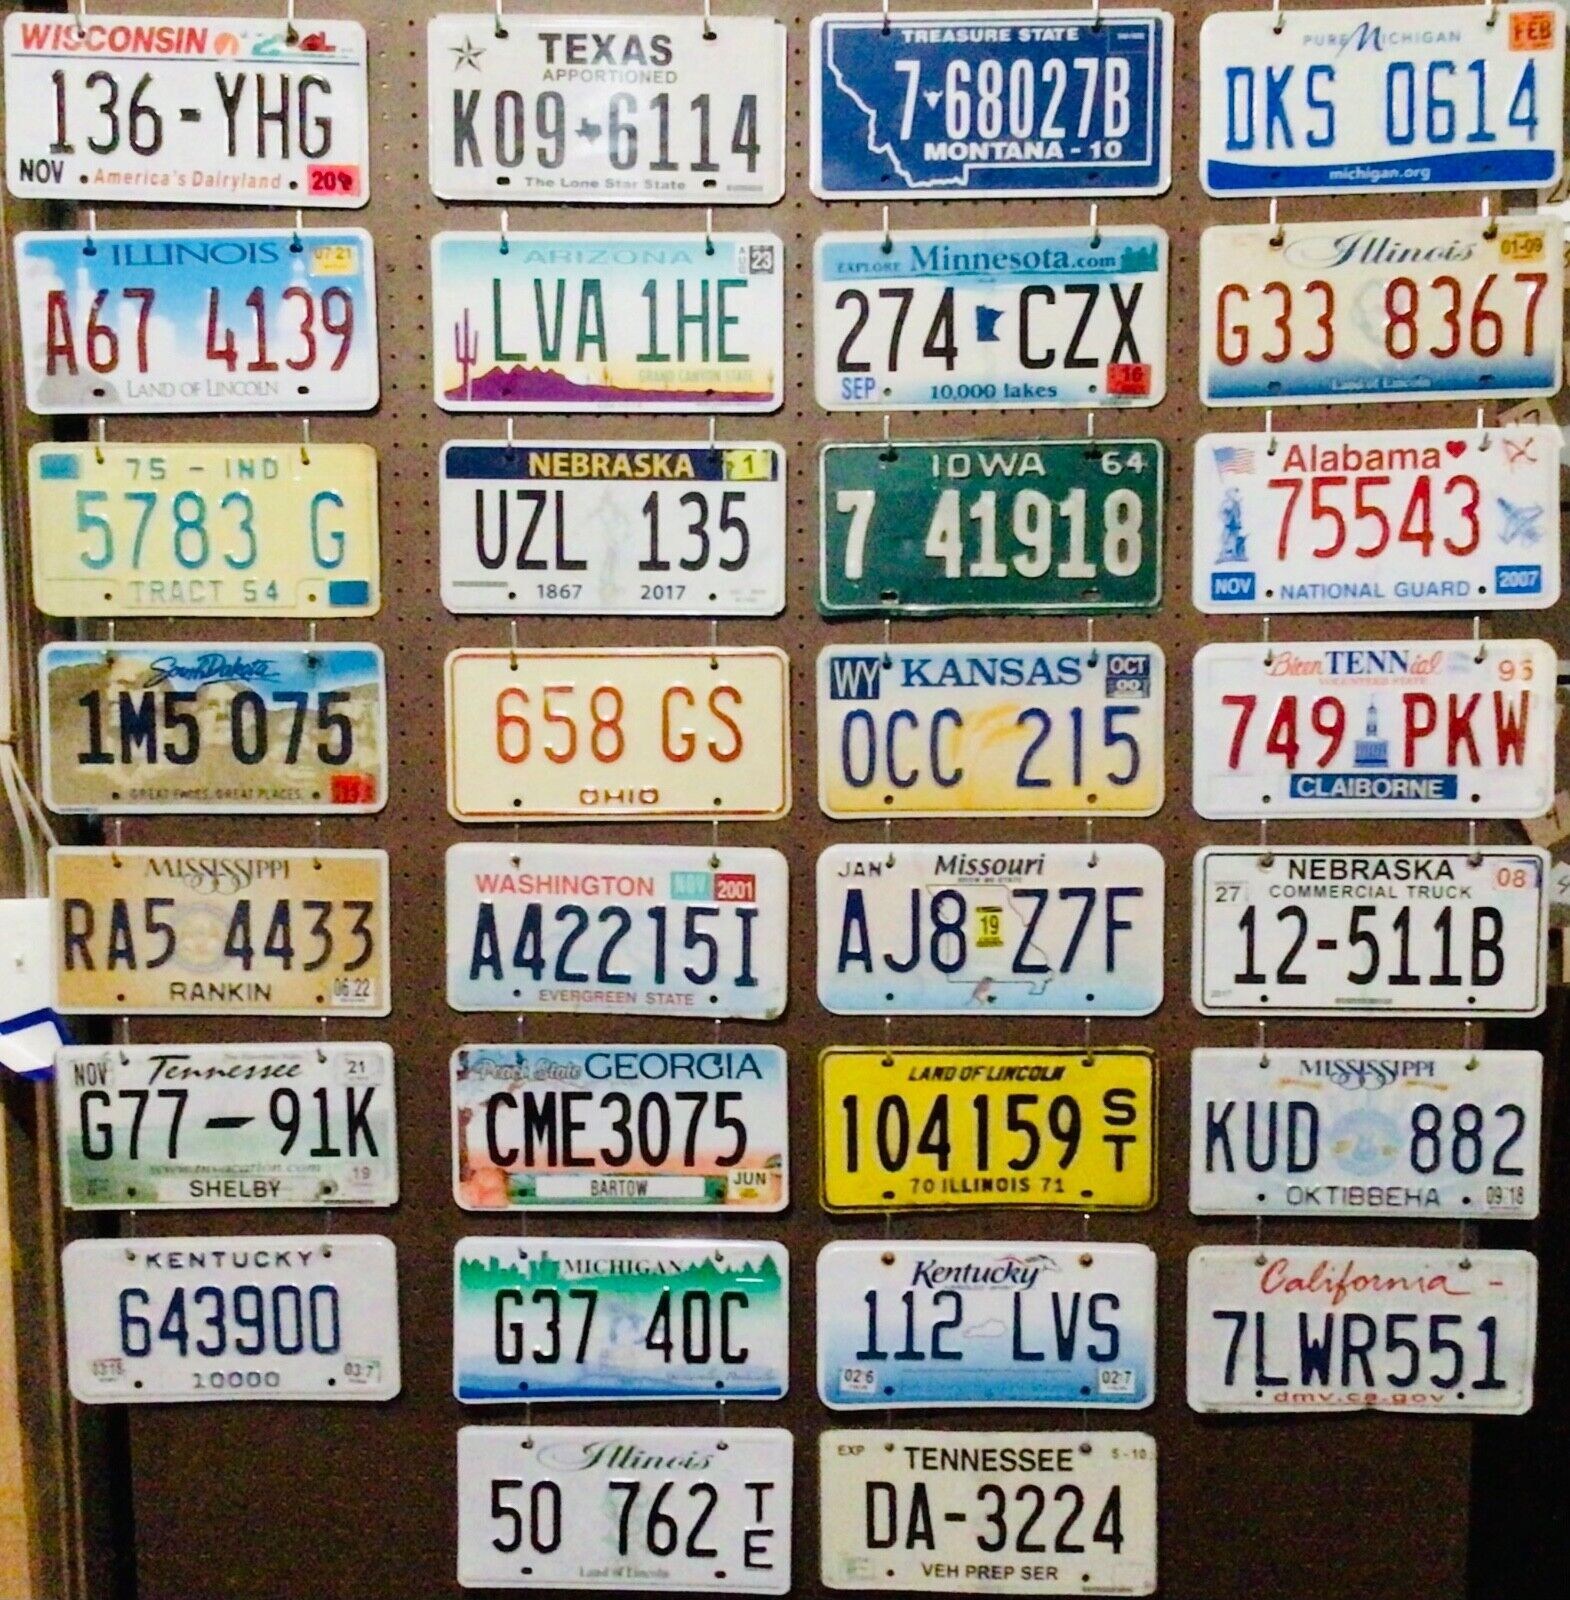 Large lot of 30 old colorful license plates - bulk - many states - low shipping